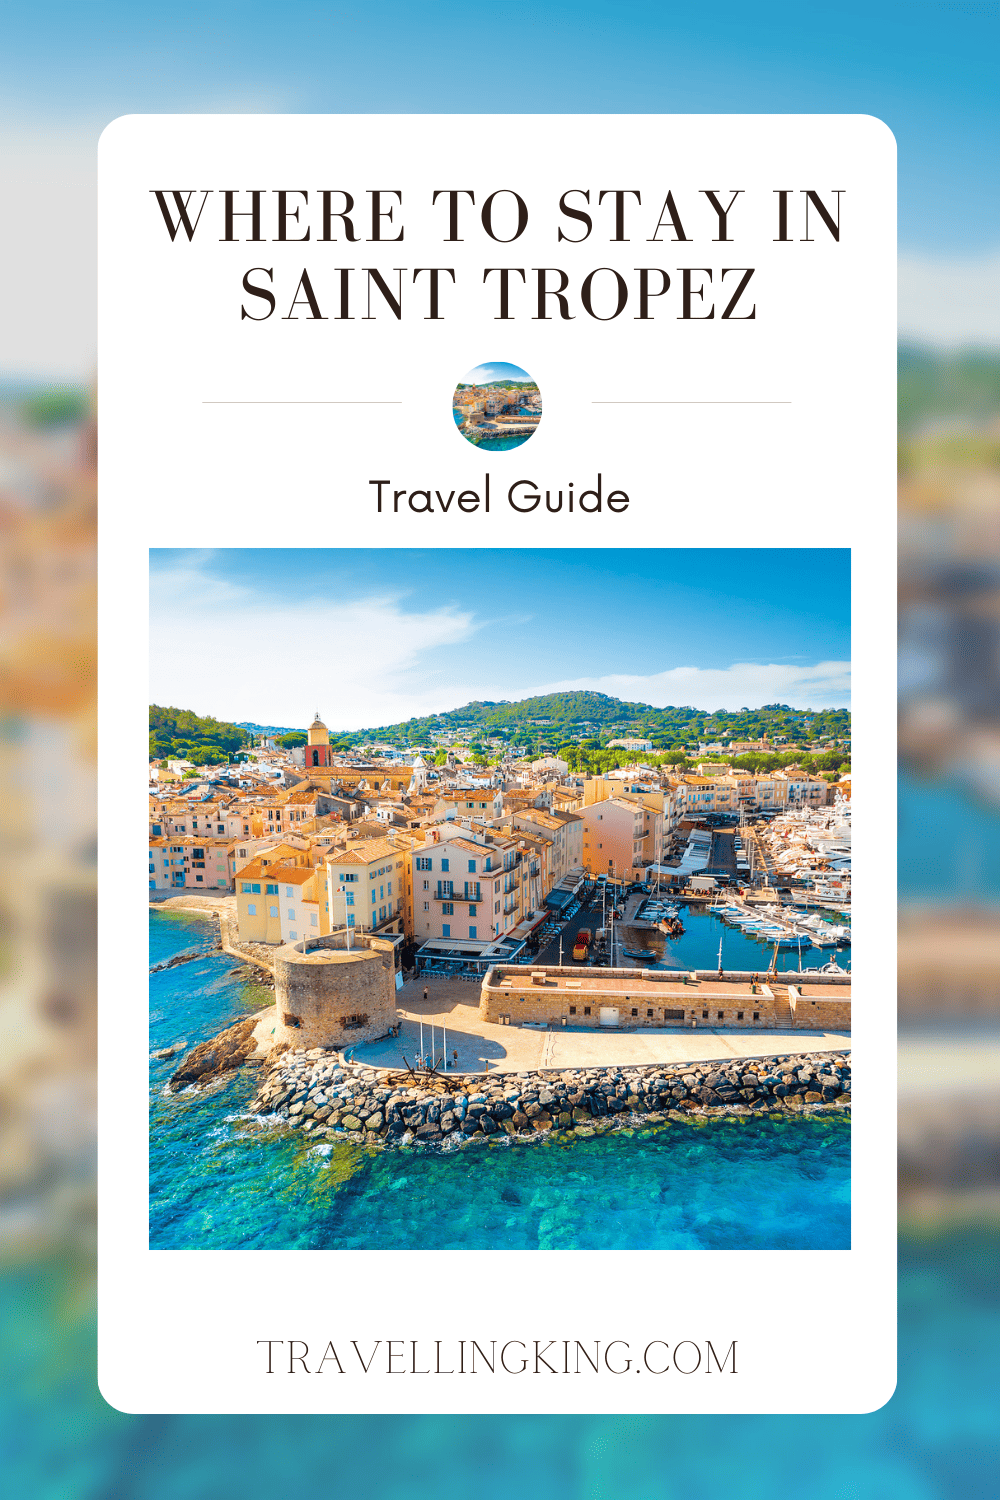 Where to stay in Saint Tropez